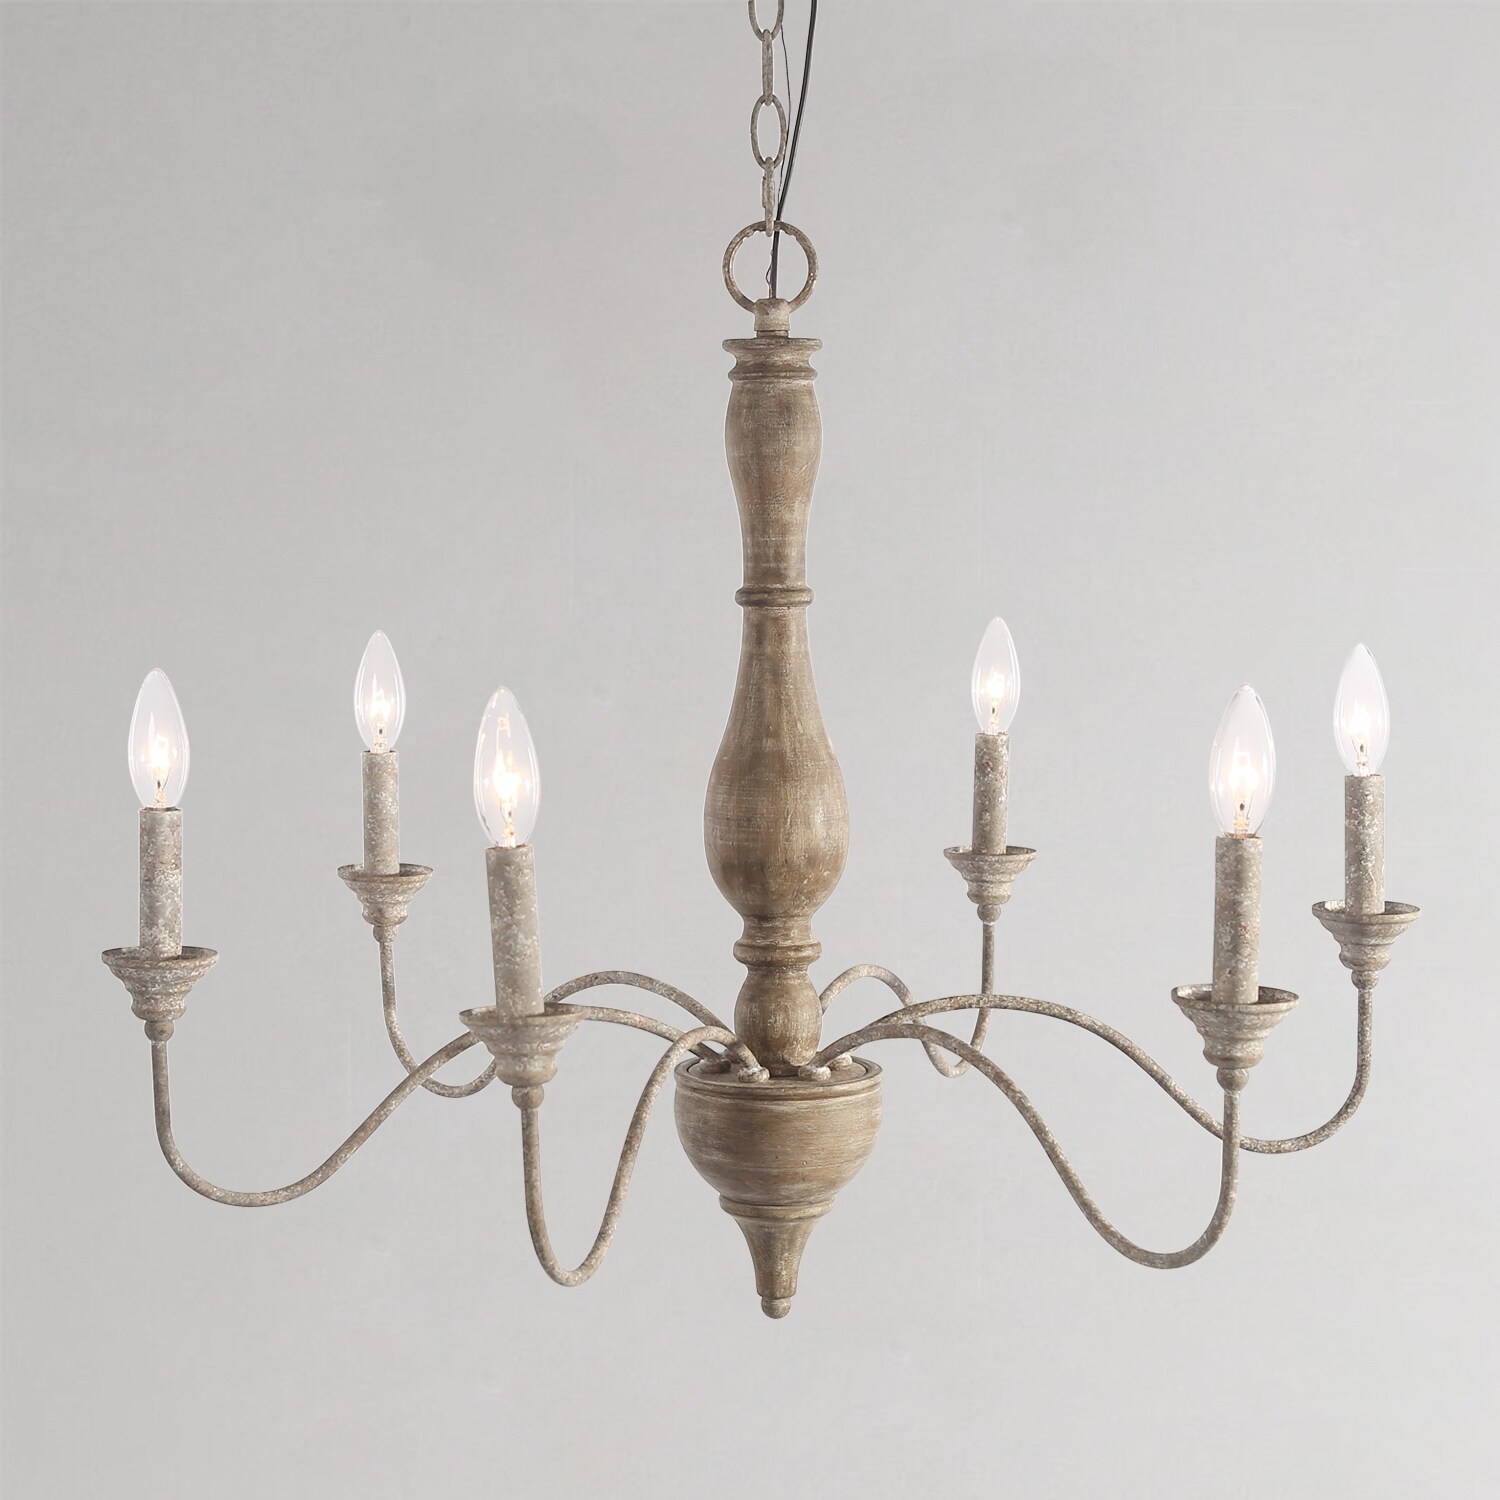 Shop Farmhouse Distressed Handmade Wood Chandeliers French Country